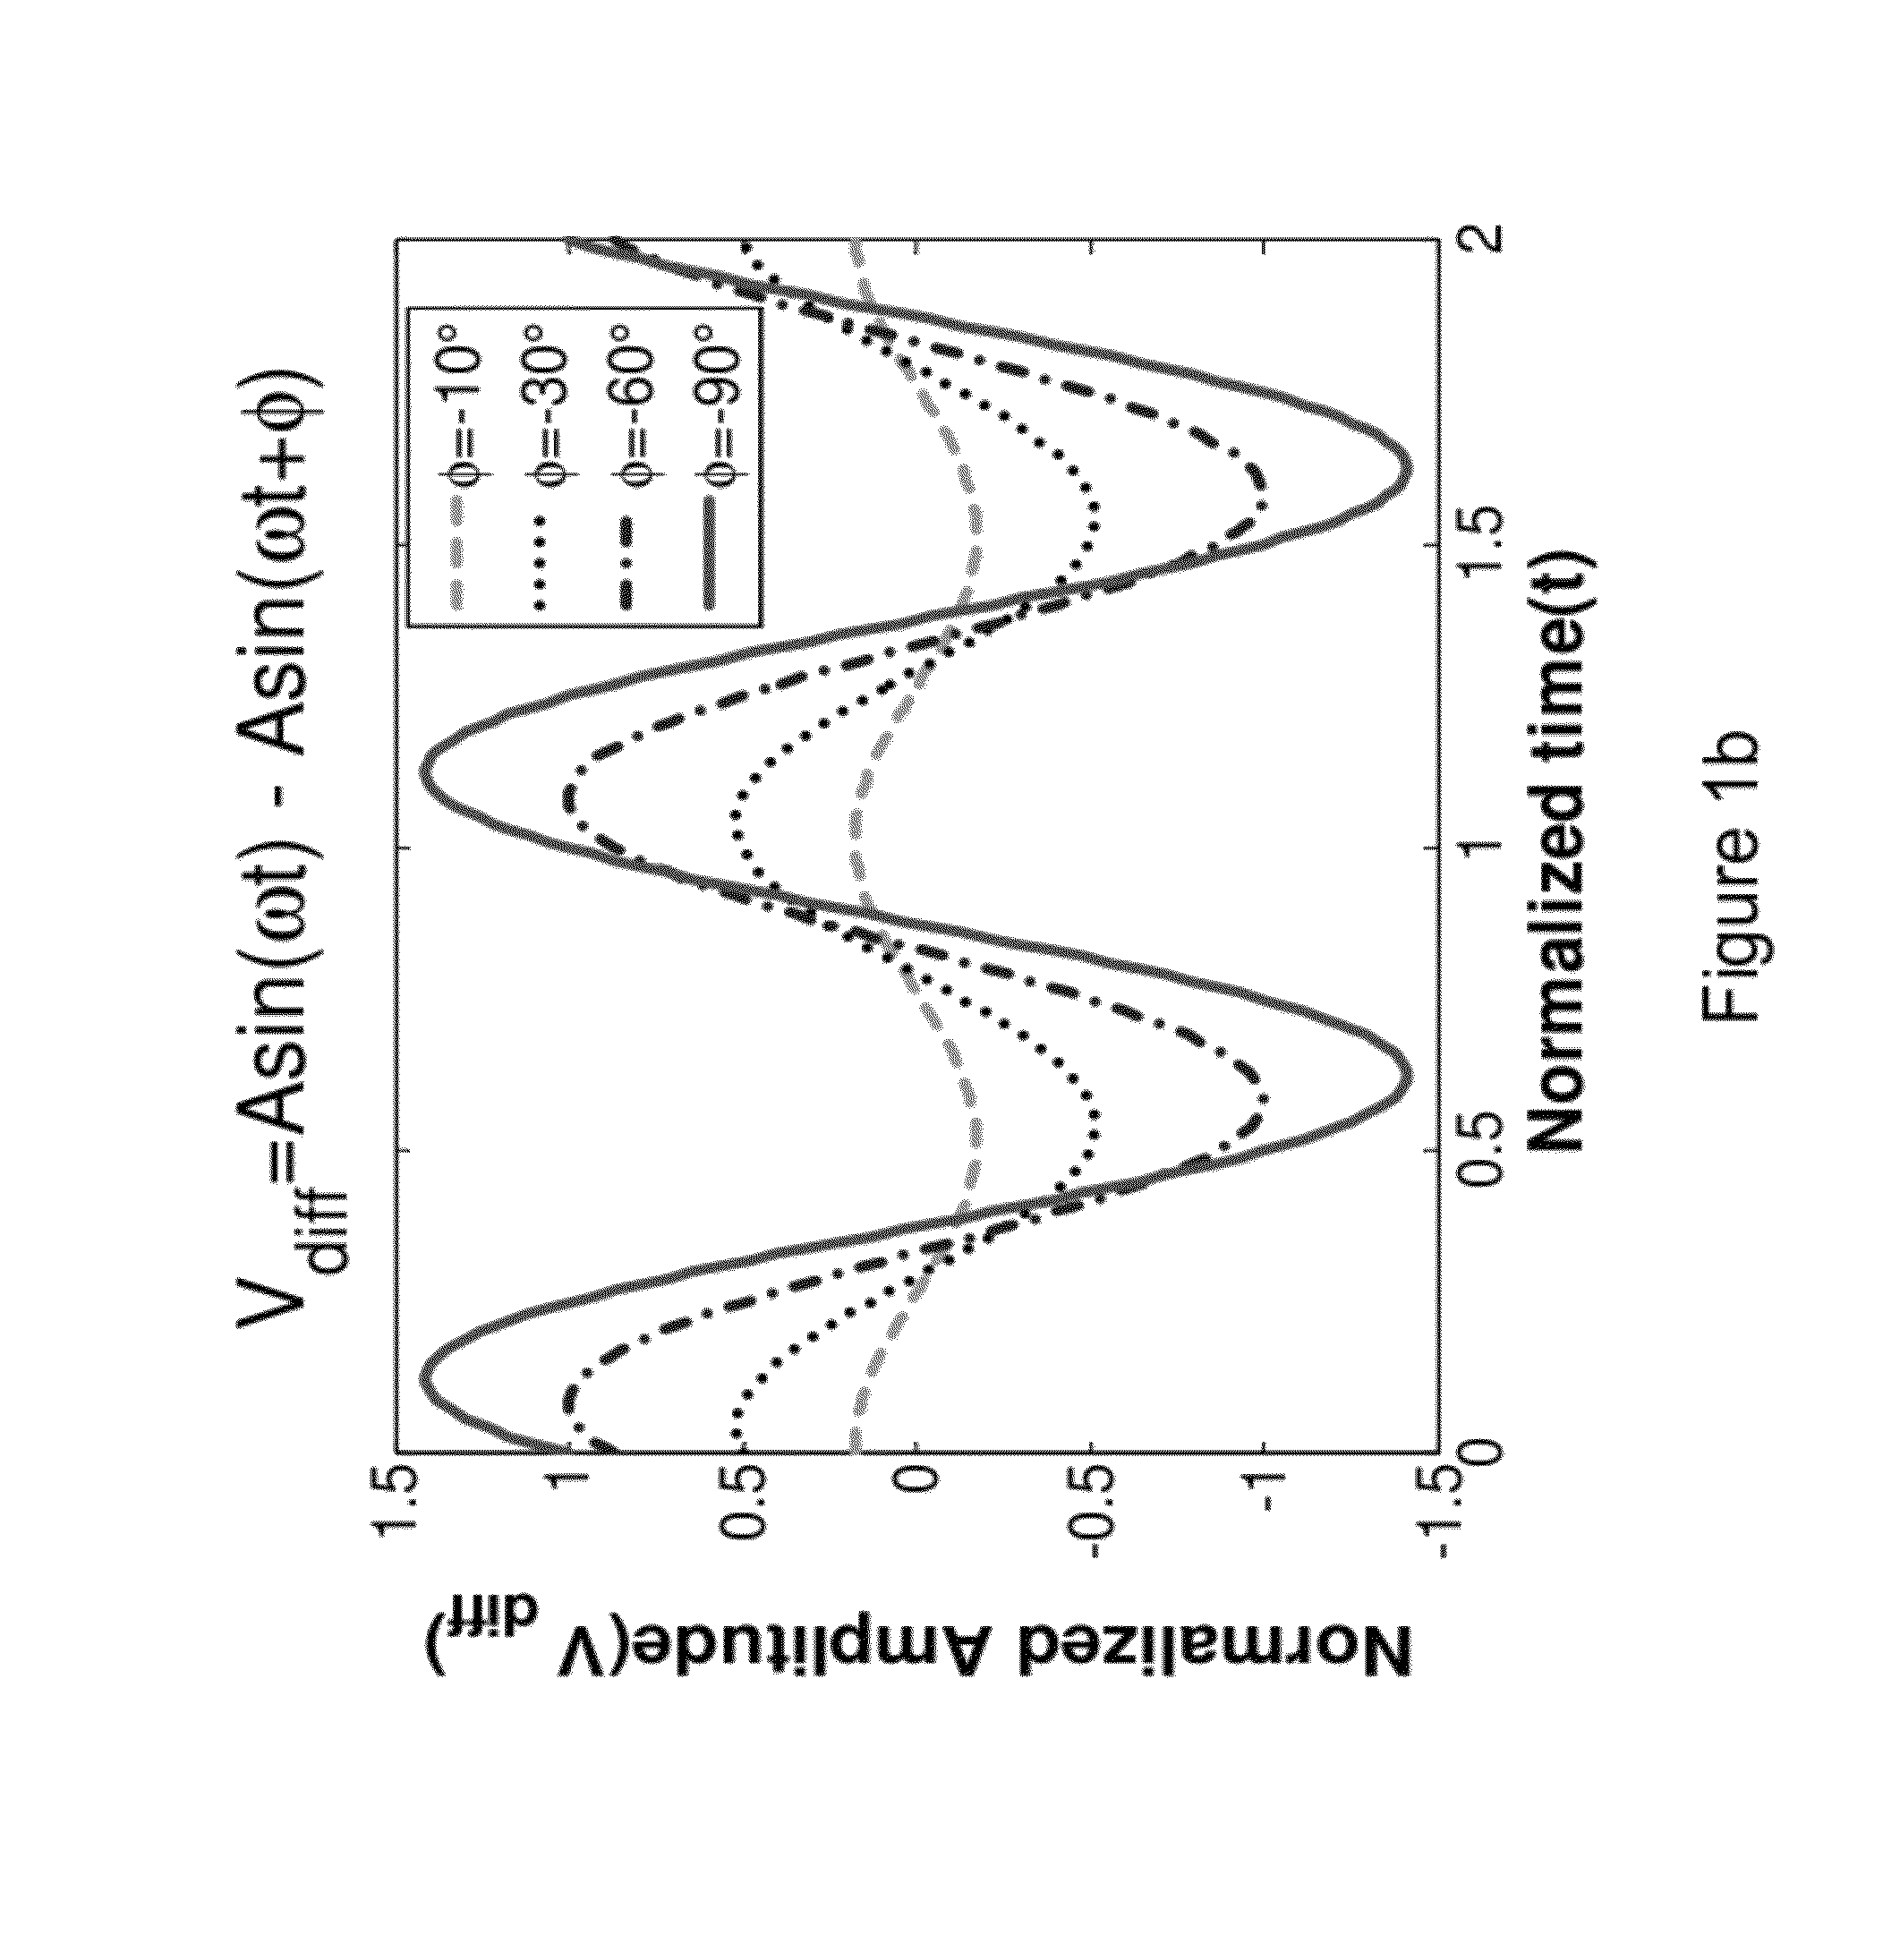 Systems and methods for distortion measurement using distortion-to-amplitude transformations